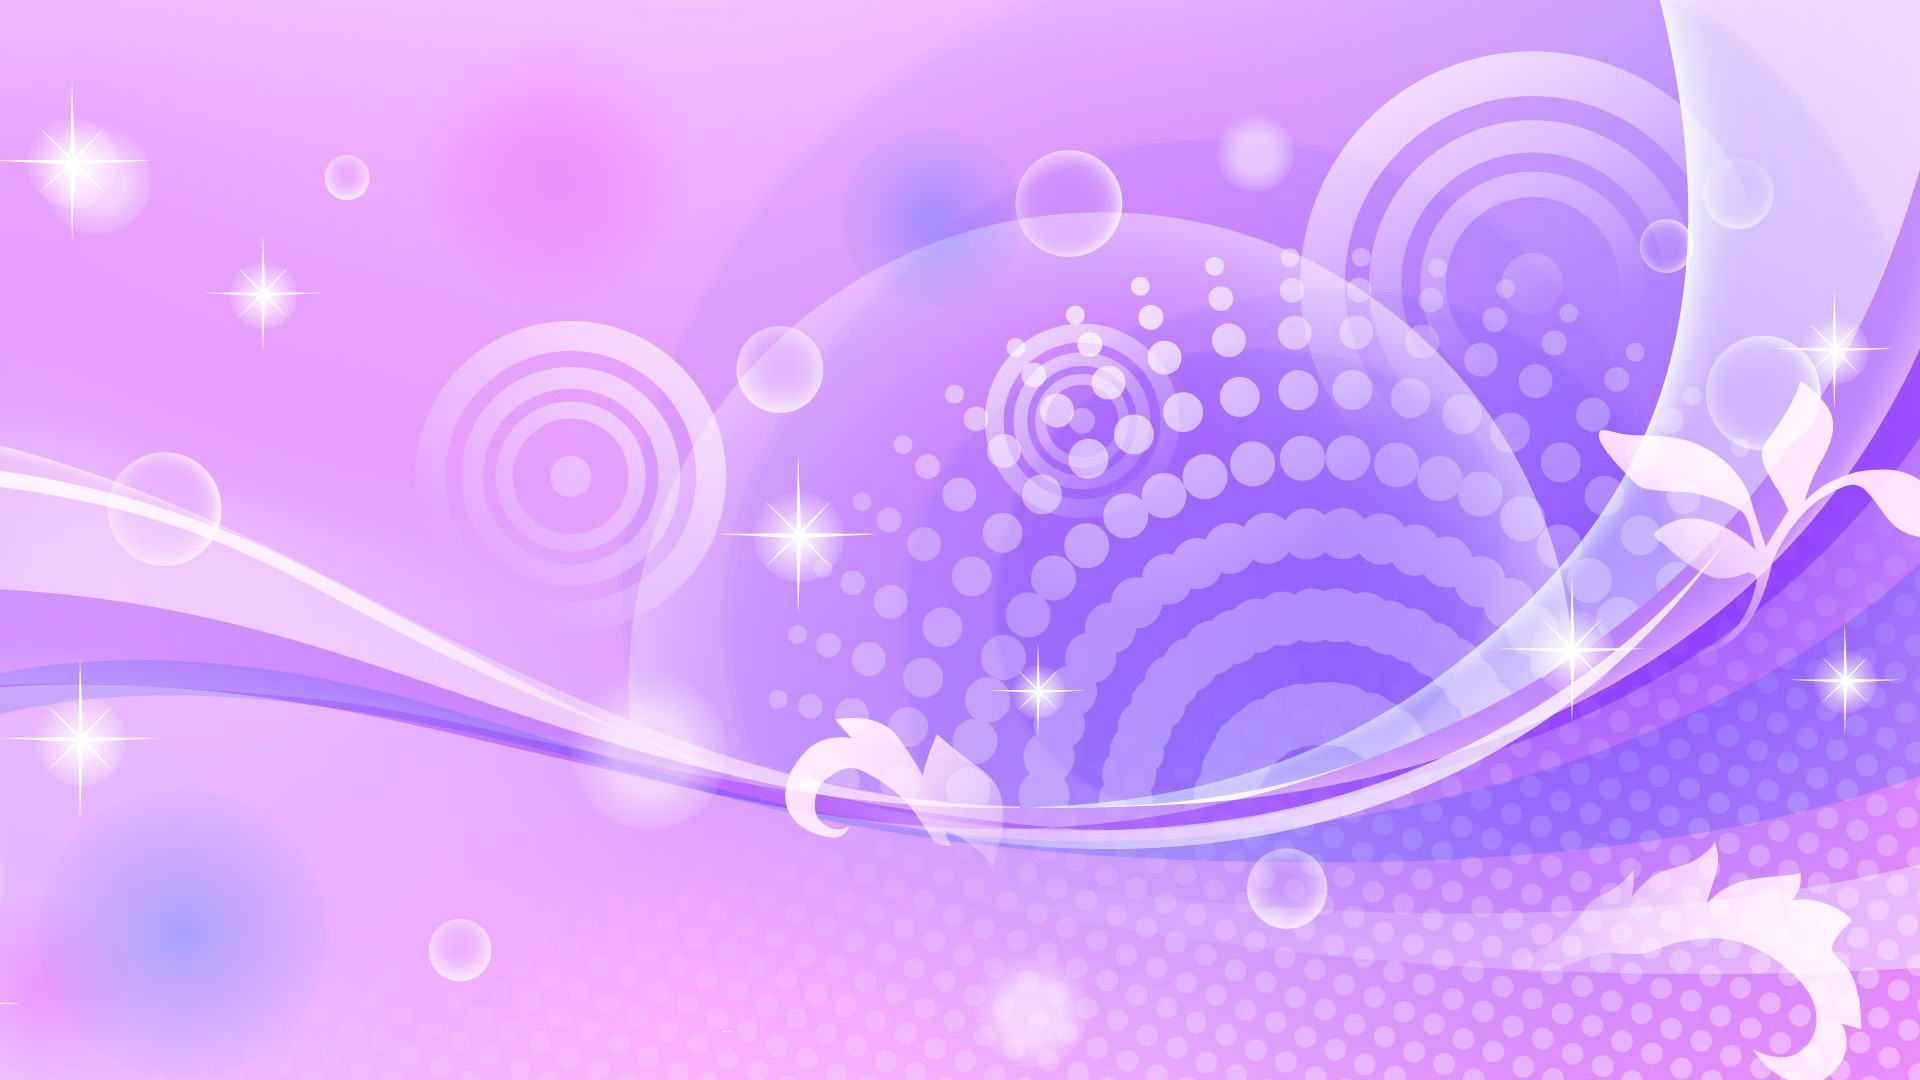 Colorful vector background wallpaper (4) #4 - 1920x1080